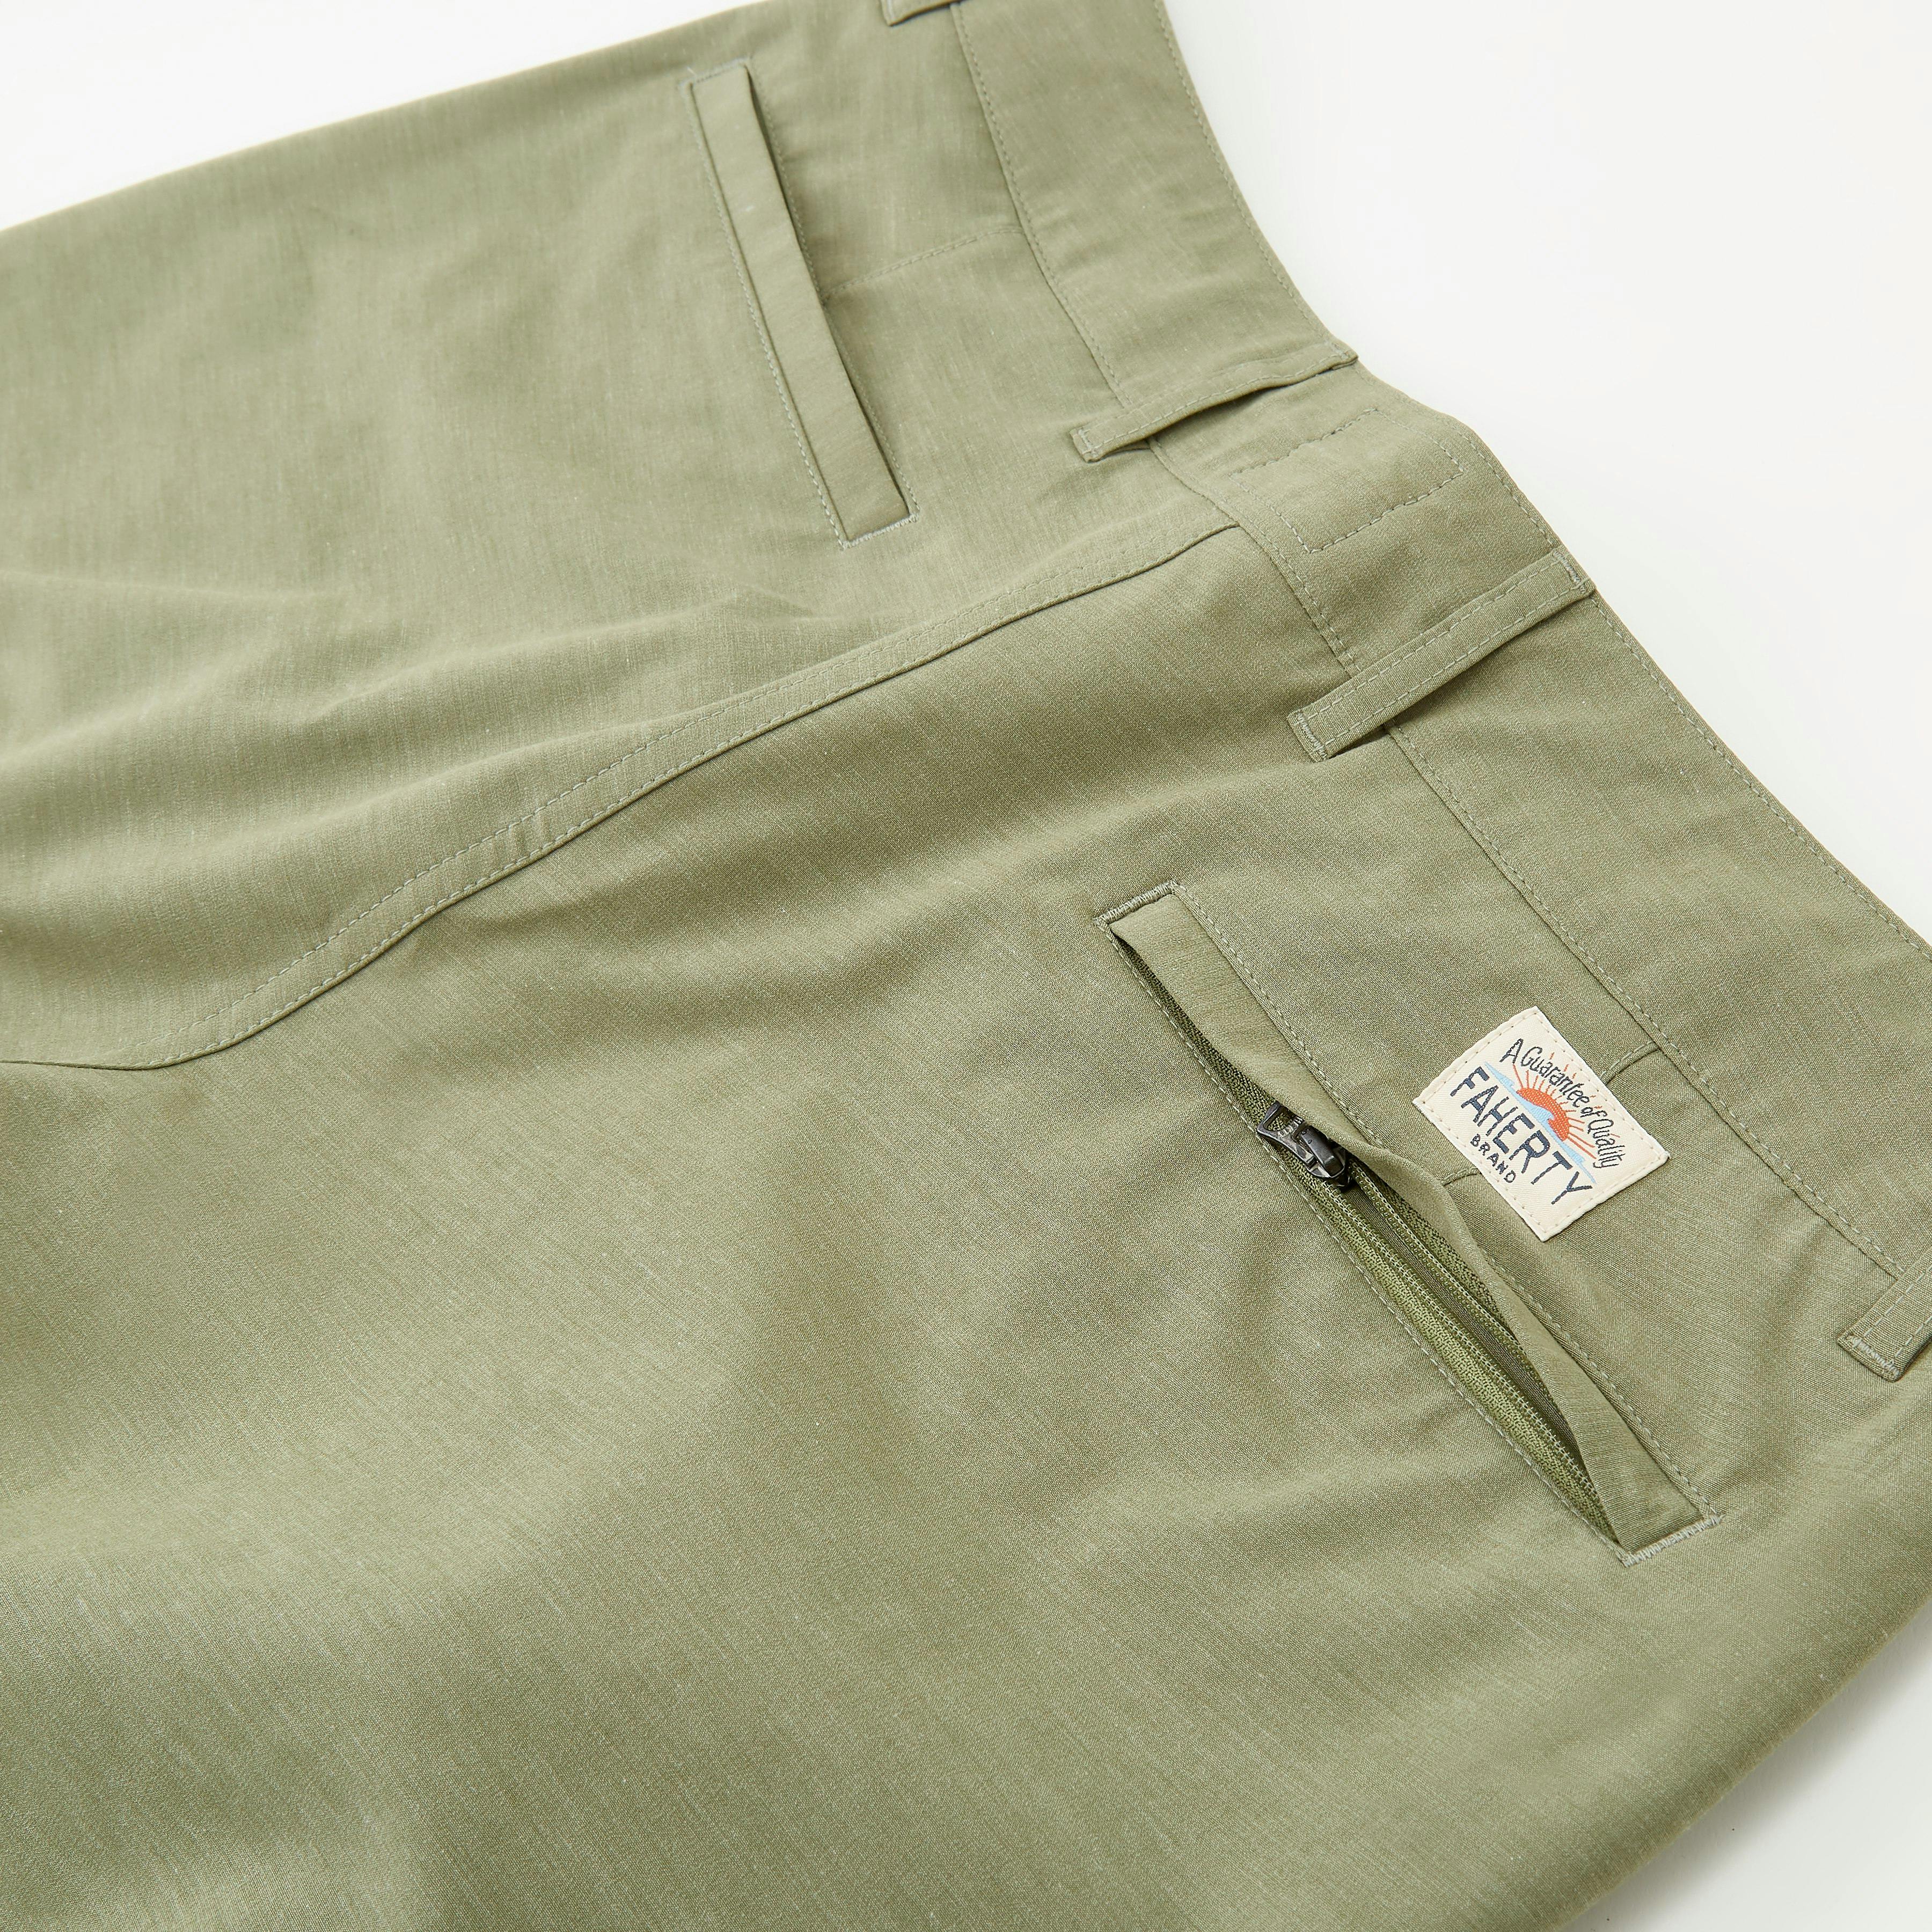 Faherty Brand Belt Loop All Day Shorts - 7"